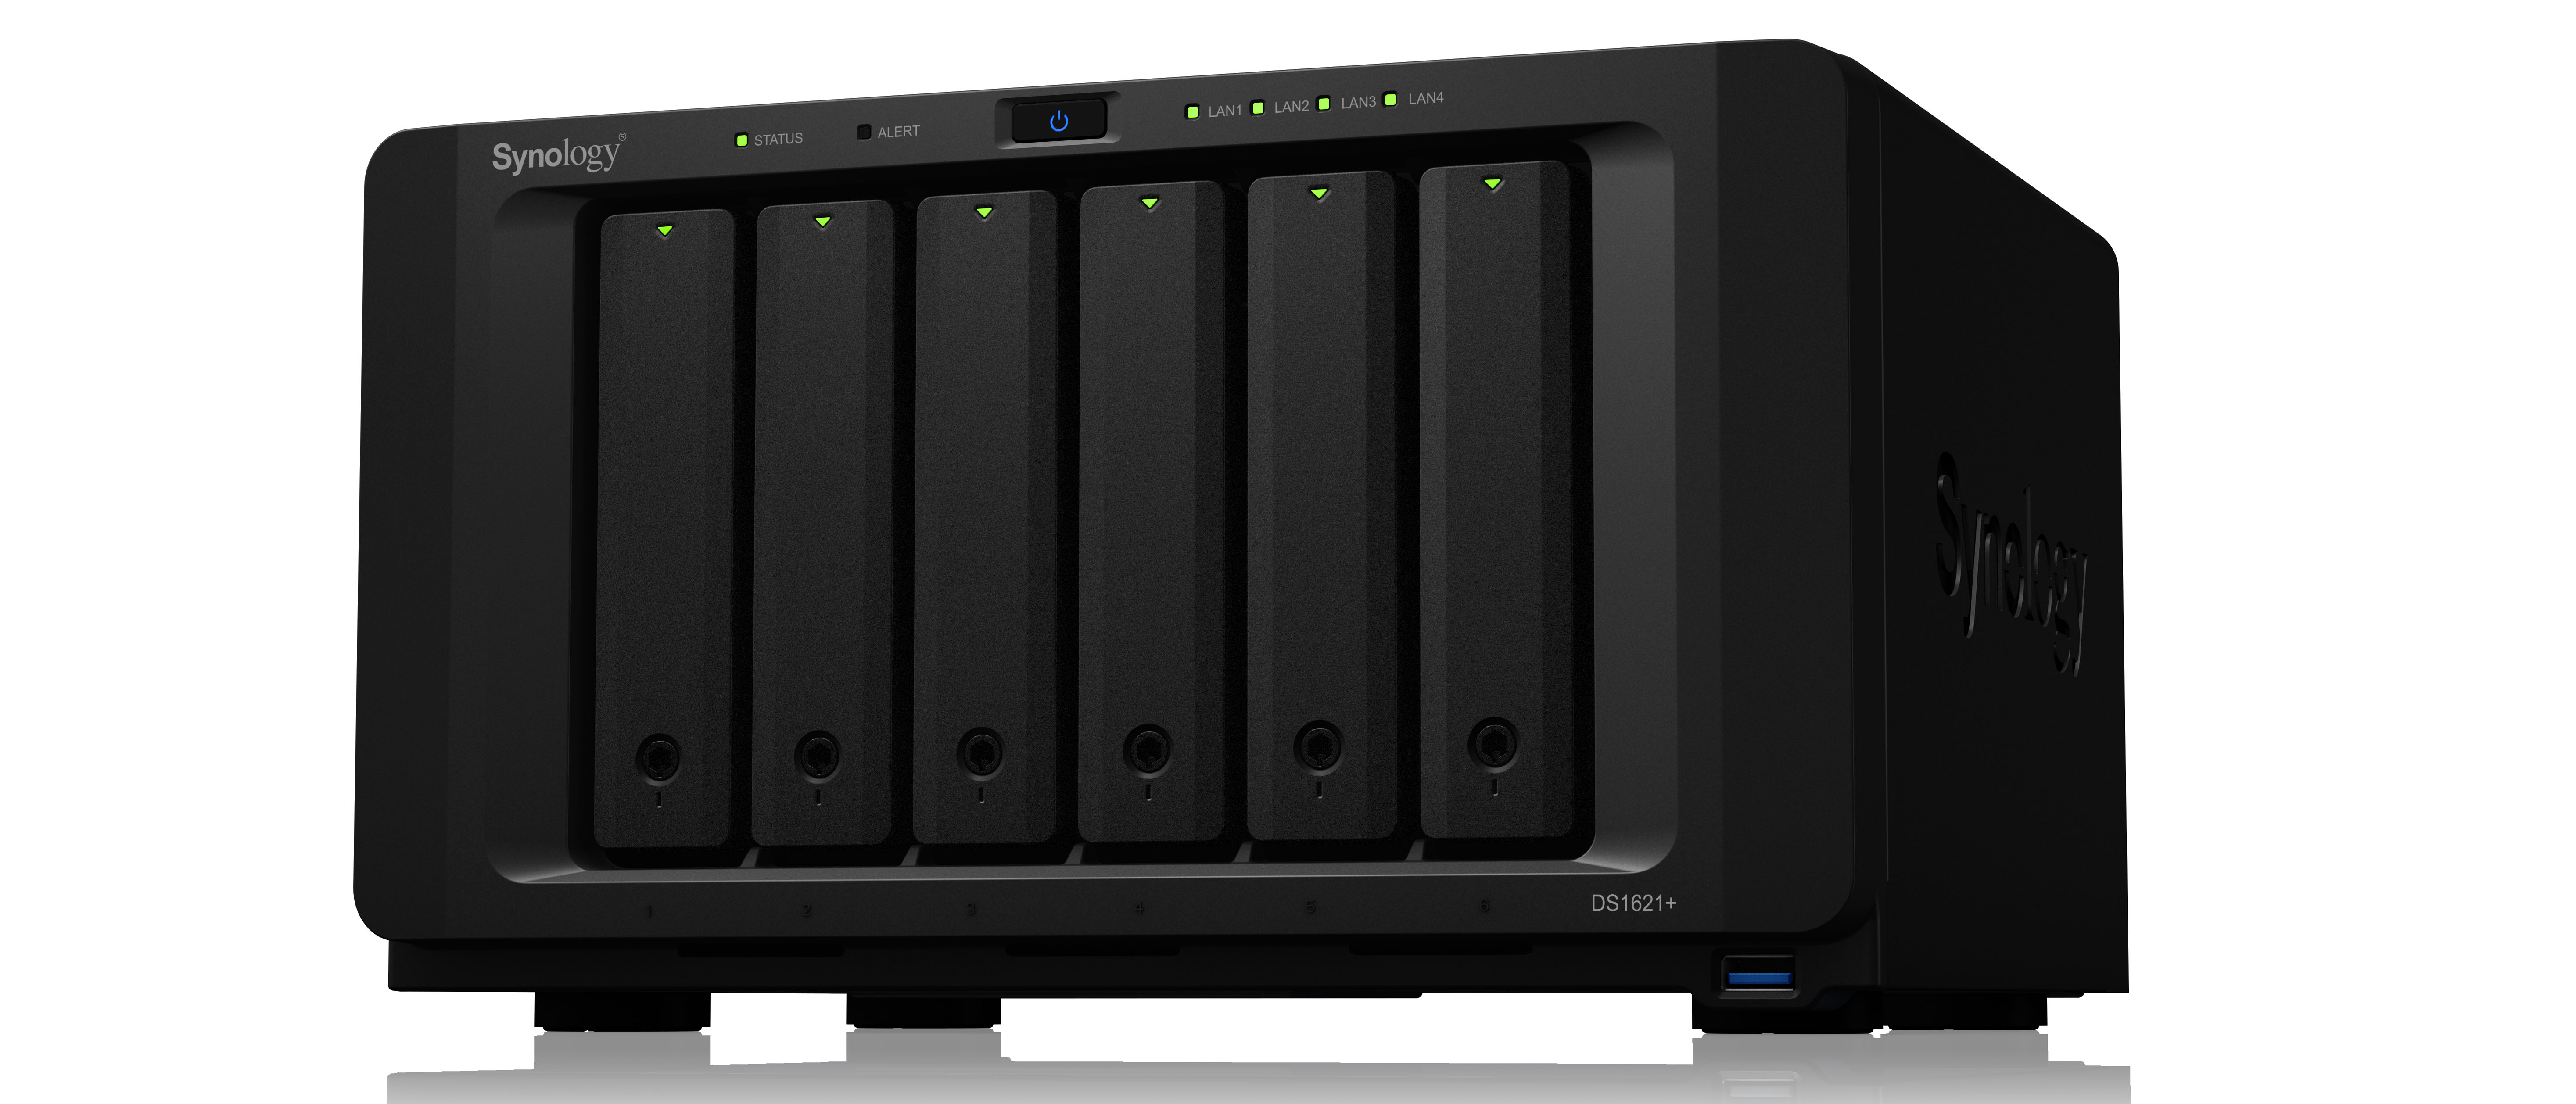 nas synology tour ds1621